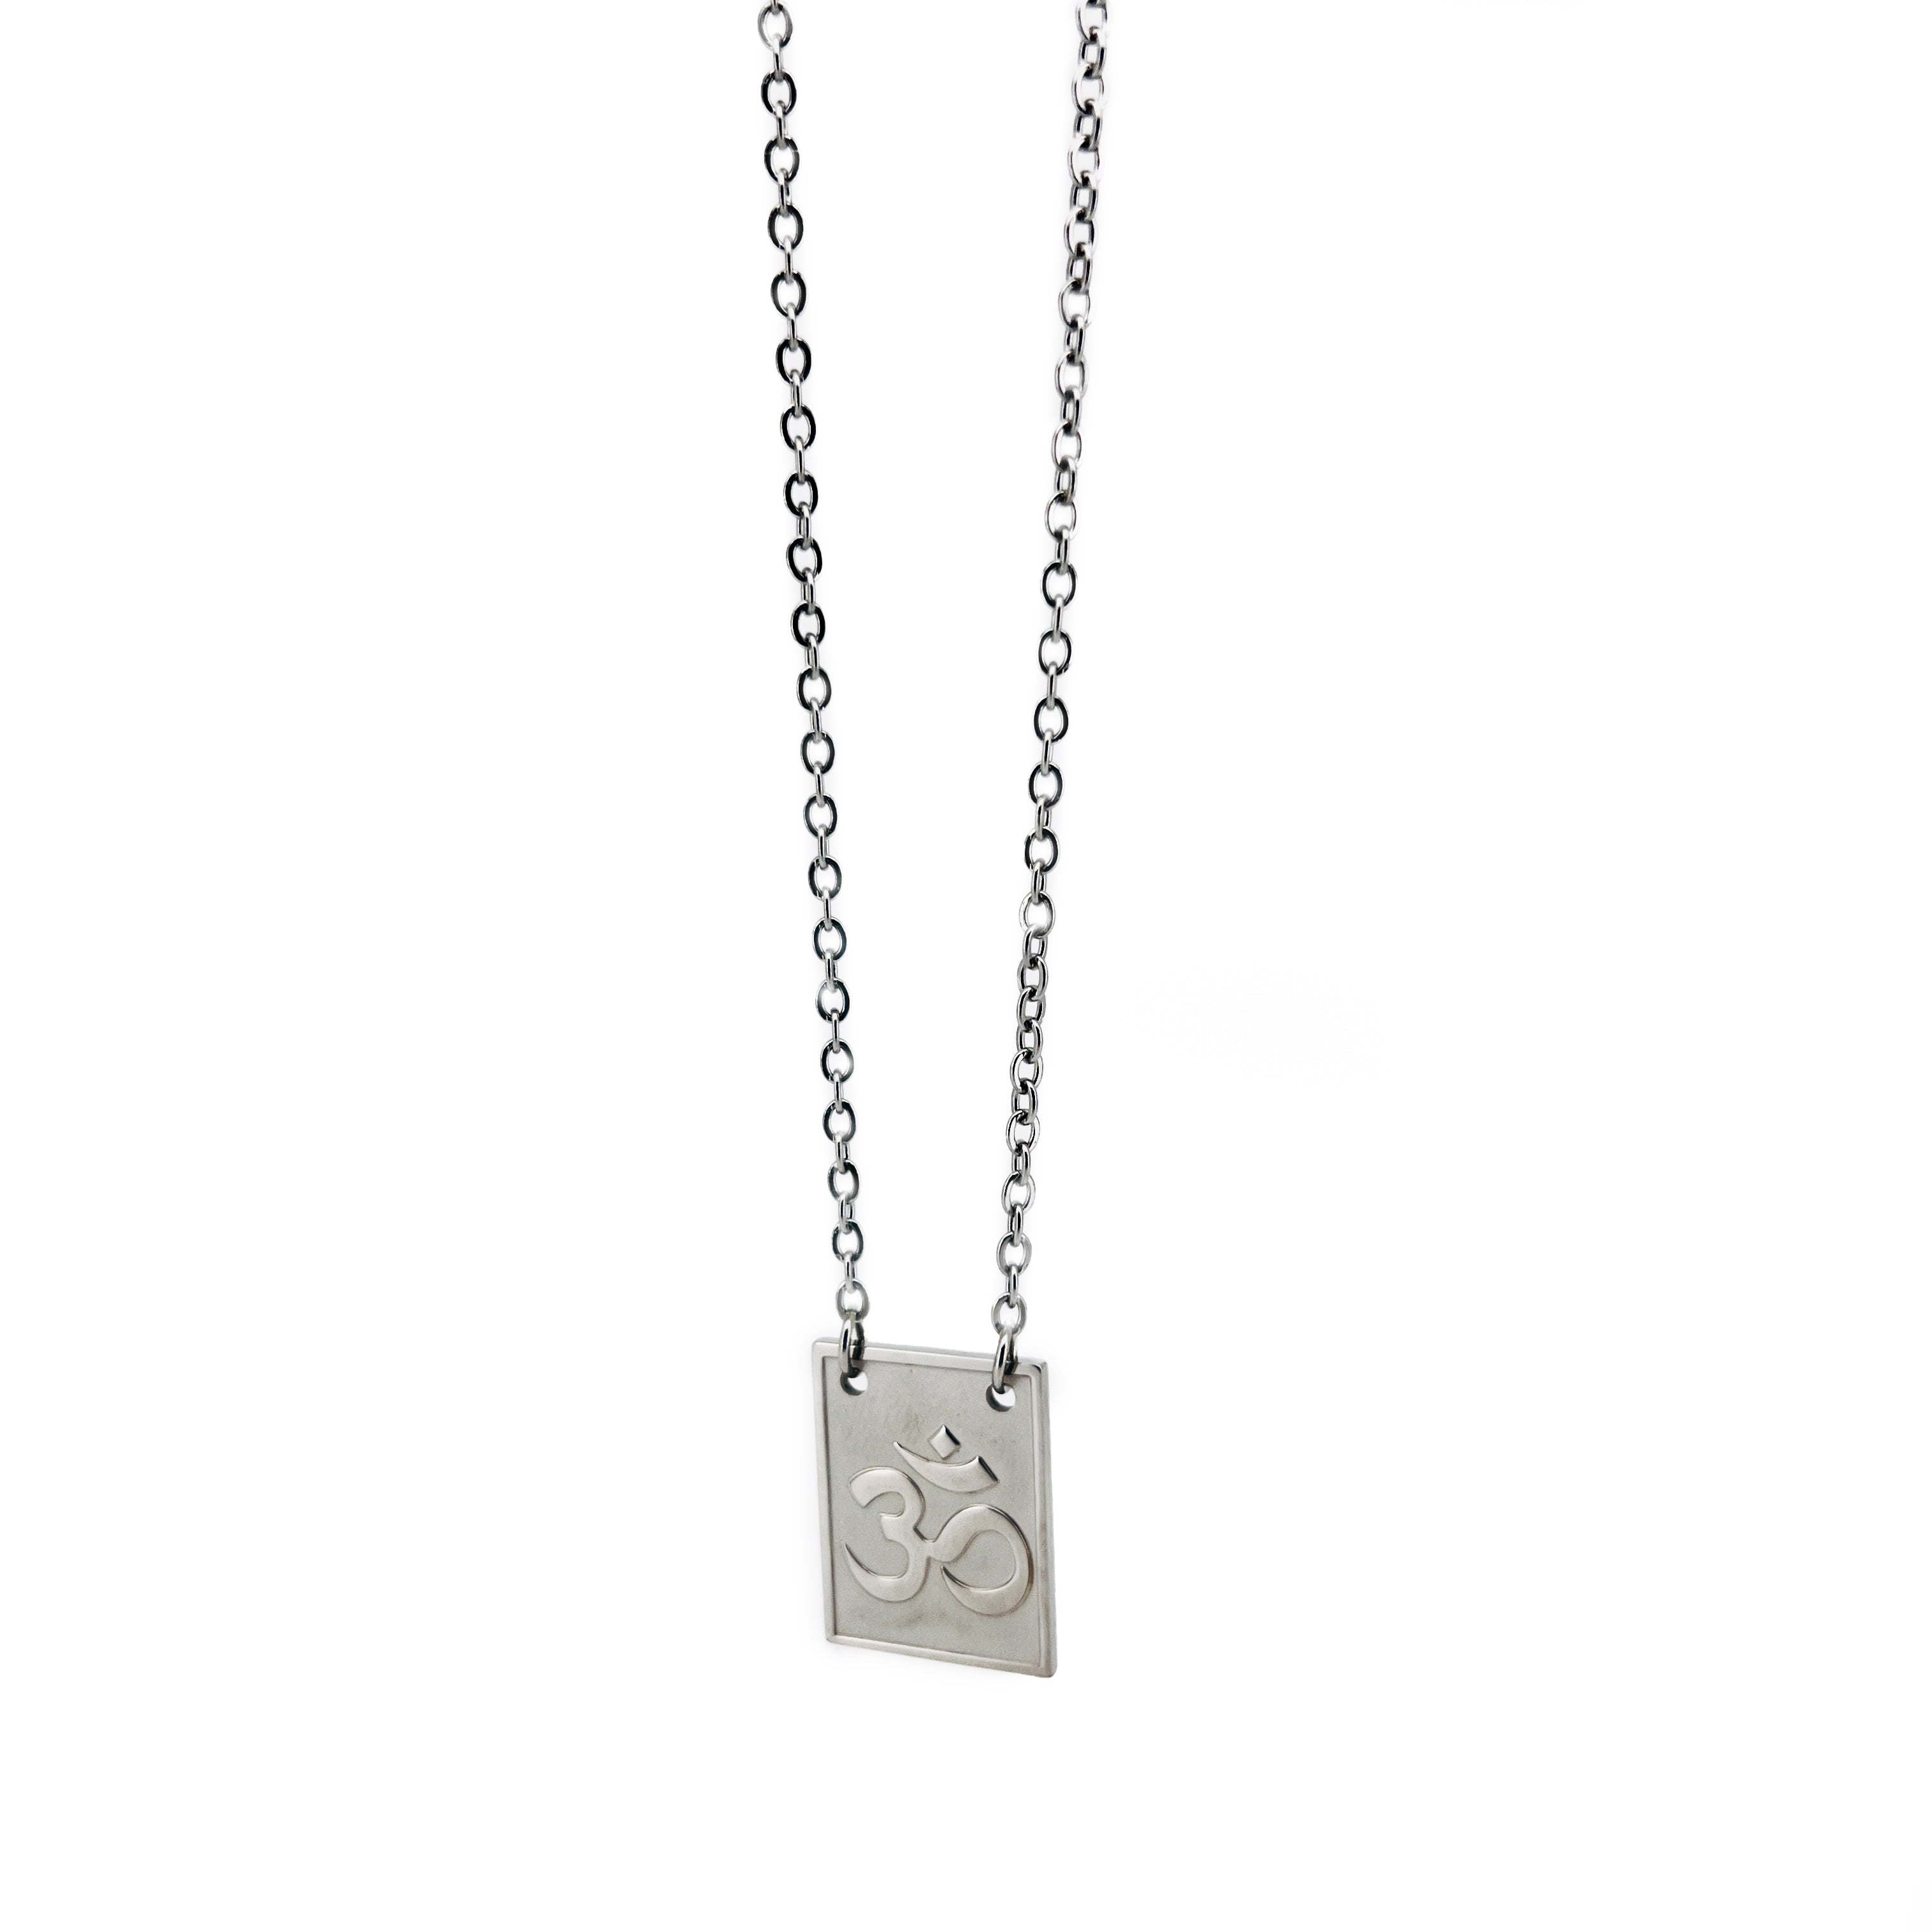 Lázaro Stainless Steel Chain Necklace with Symbolic Pendant